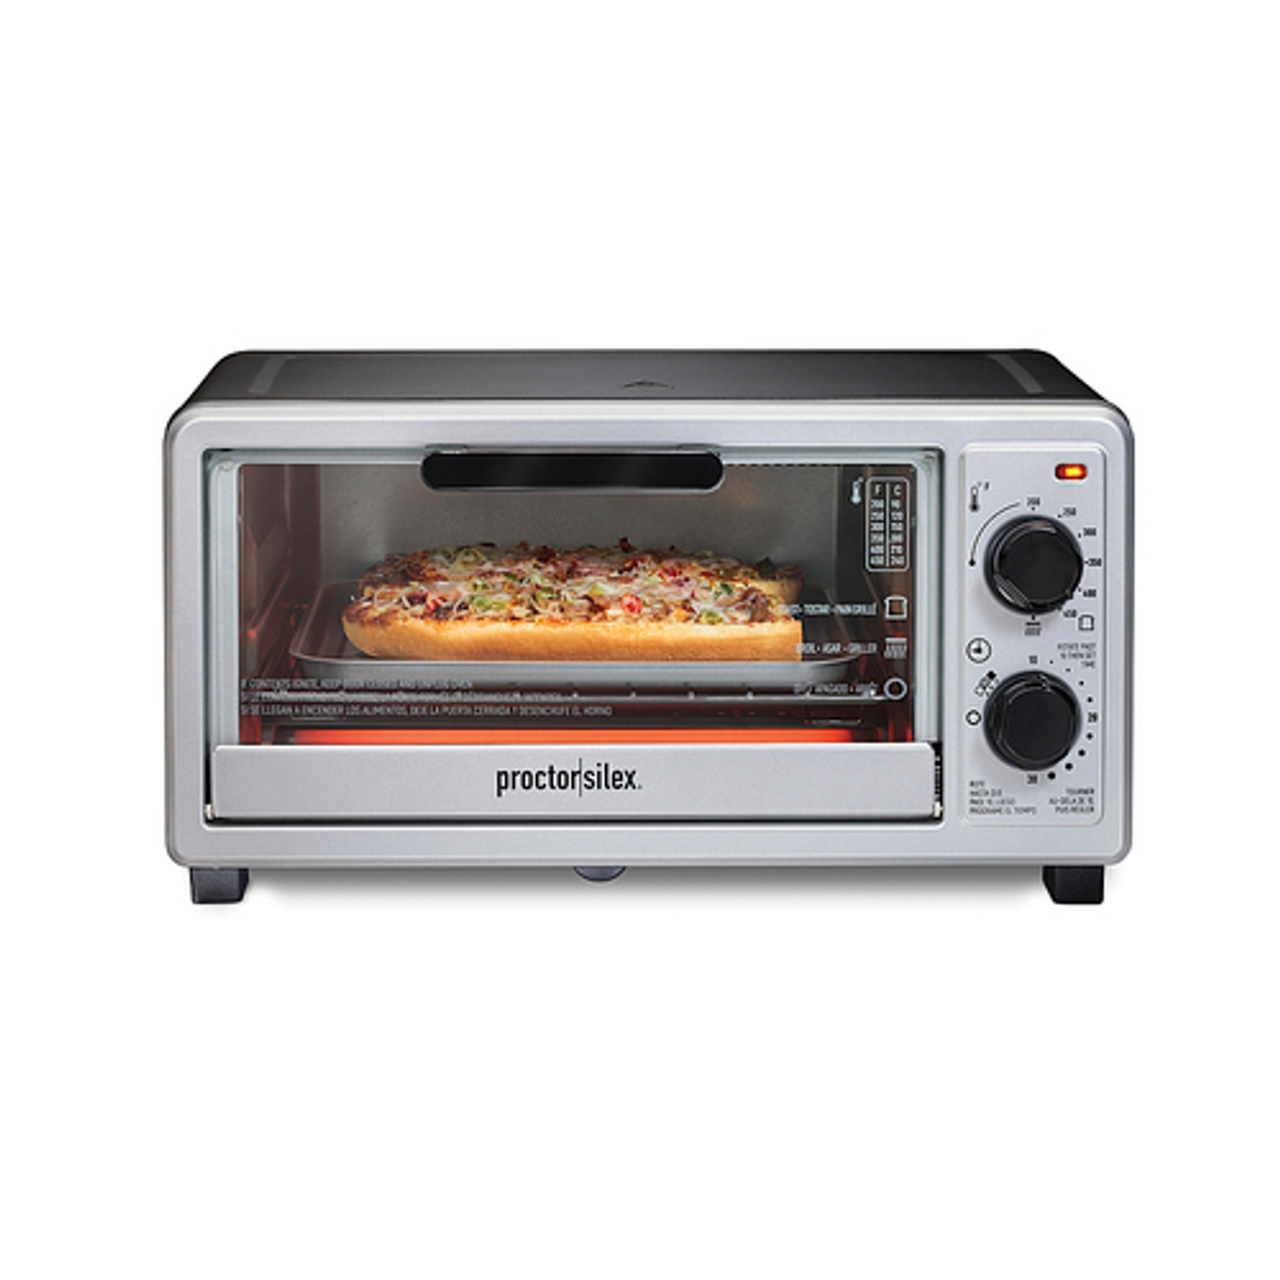 Proctor Silex 4 Slice Toaster Oven Broiler, 1100 Watts, Black and Silver Finish, 31260 - BLACK